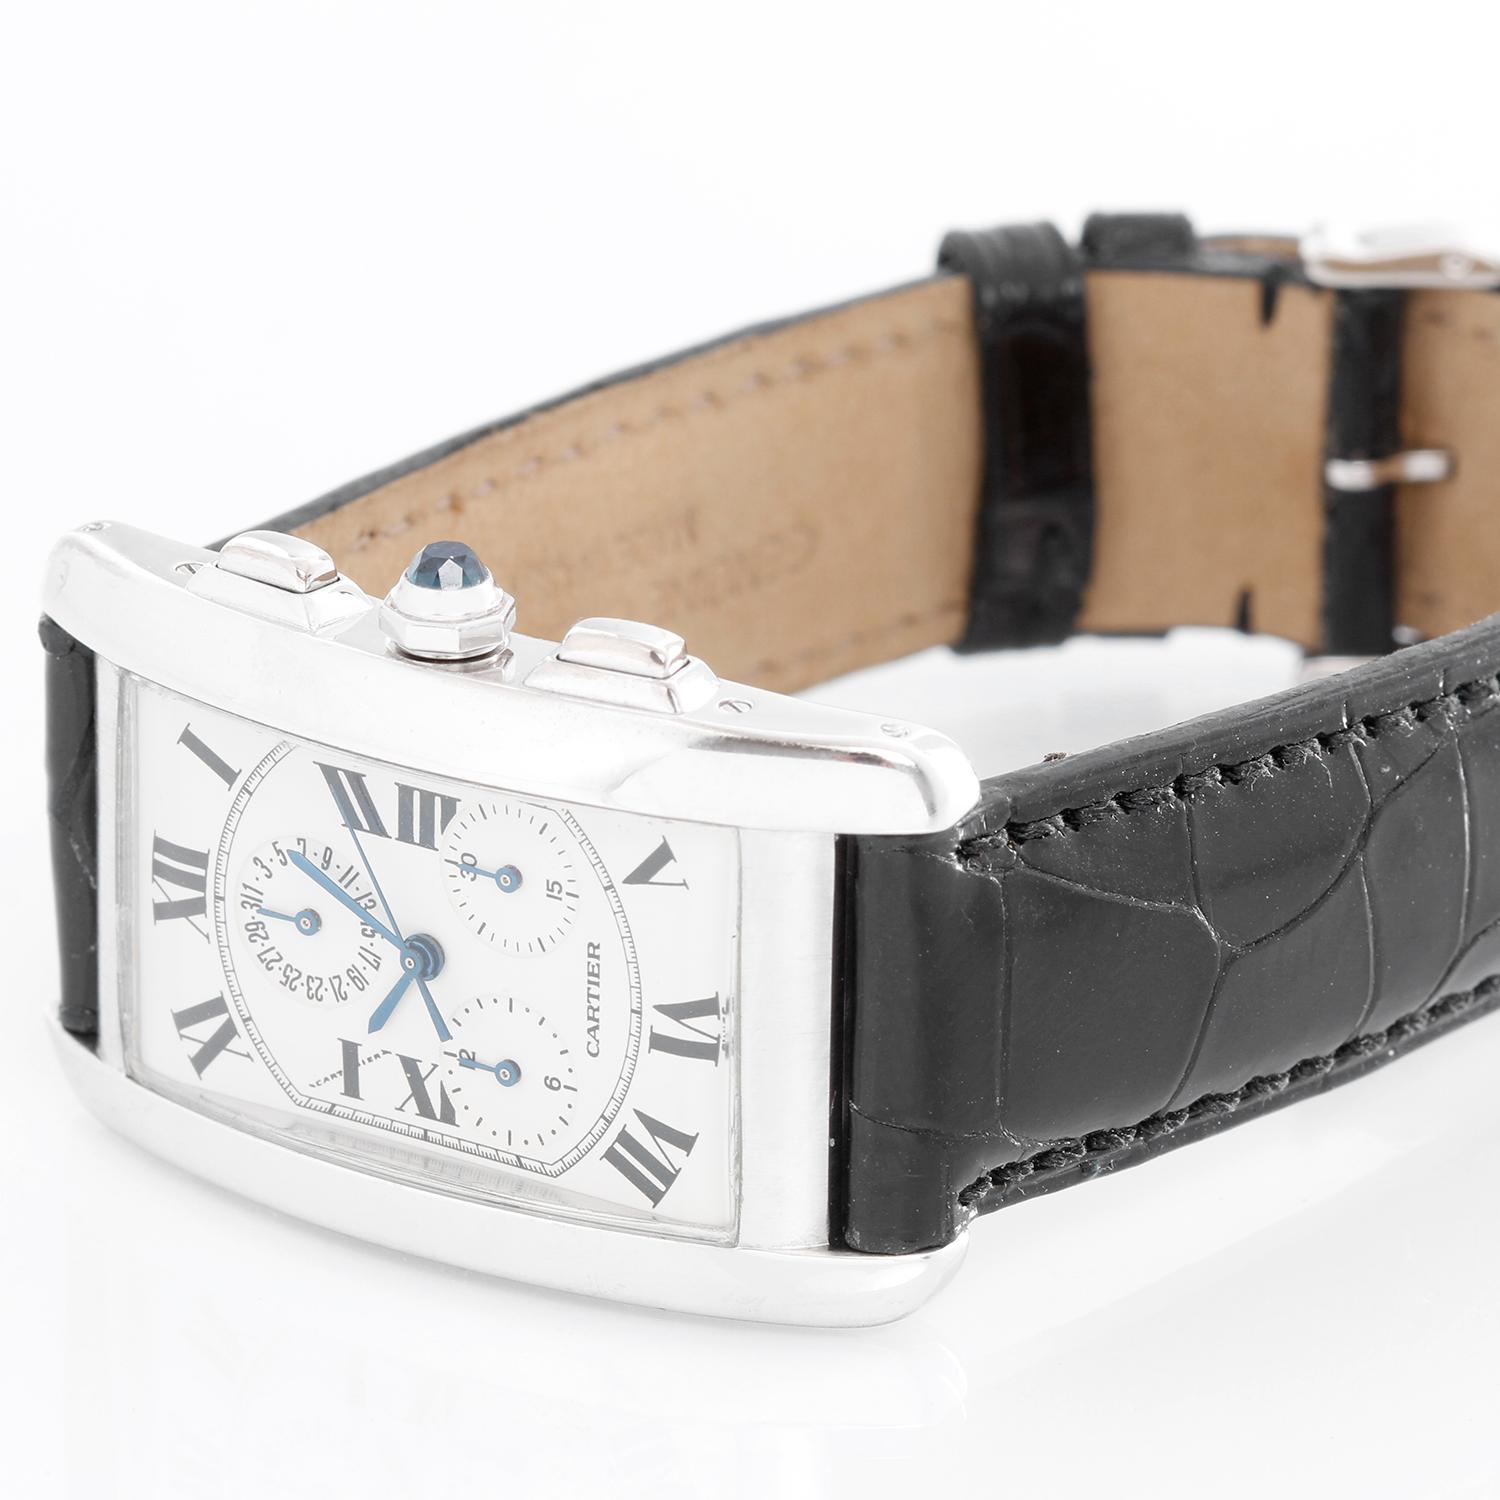 Cartier Tank Americaine (or American) Chronograph Men's Watch W2603356 -  Quartz chronograph with date. 18k white gold rectangular style case (26mm x 45mm). Ivory colored dial with black Roman numerals; date; hour minutes and seconds recorders.